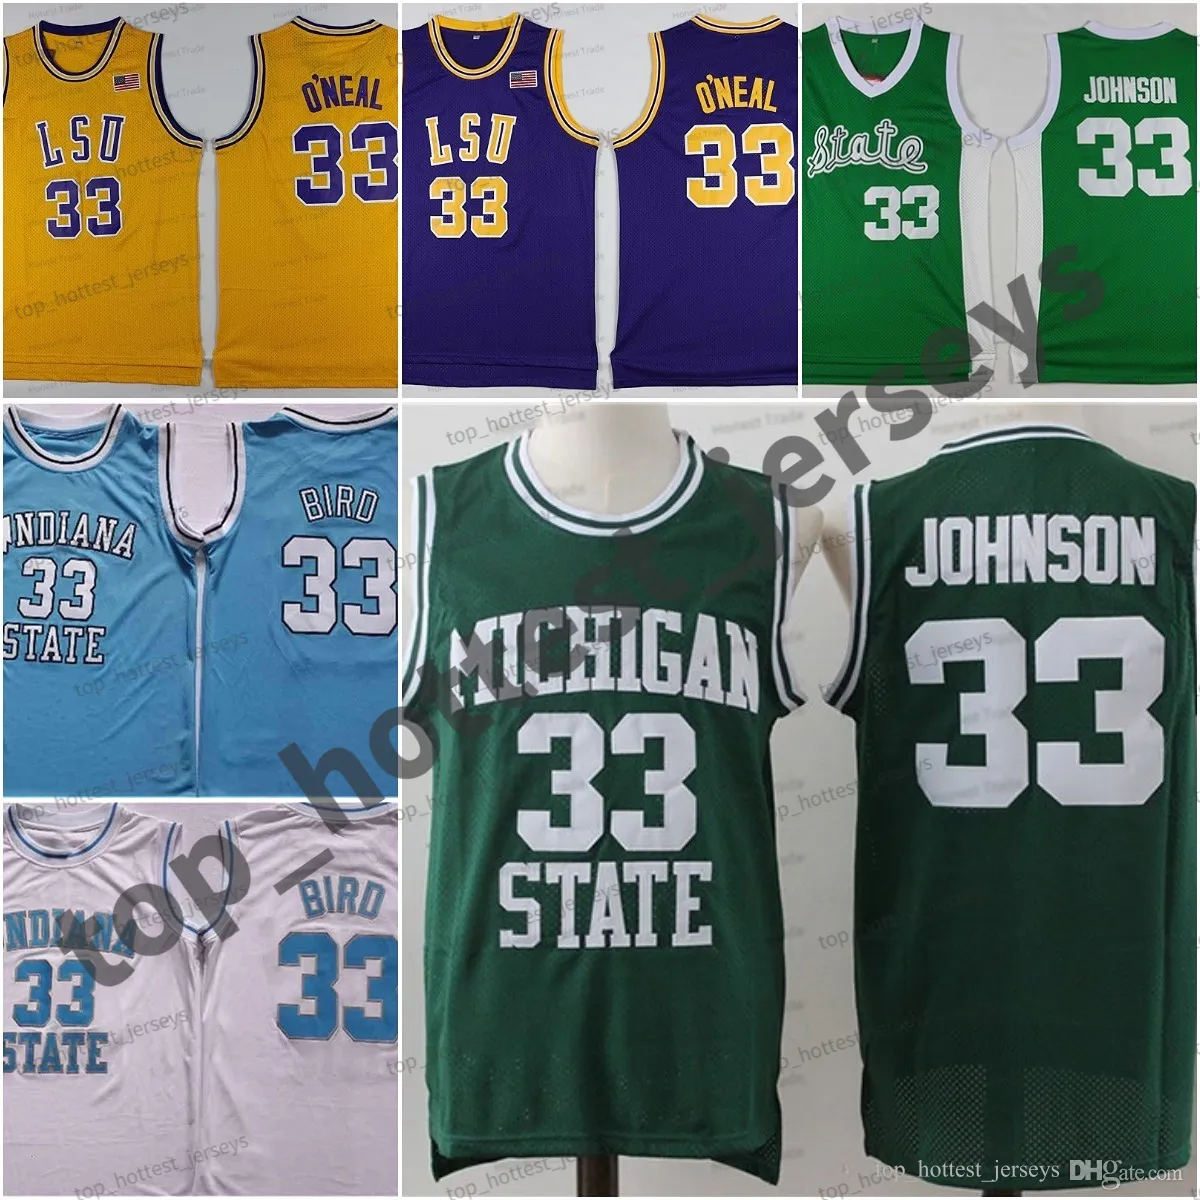 Indiana State Sycamores 33 Larry Bird White Jersey 33 Johnson Green Lsu Tigers 33 Shaquille Oneal Michigan College Football Jerseys Mens Mens All Stitched Shirts